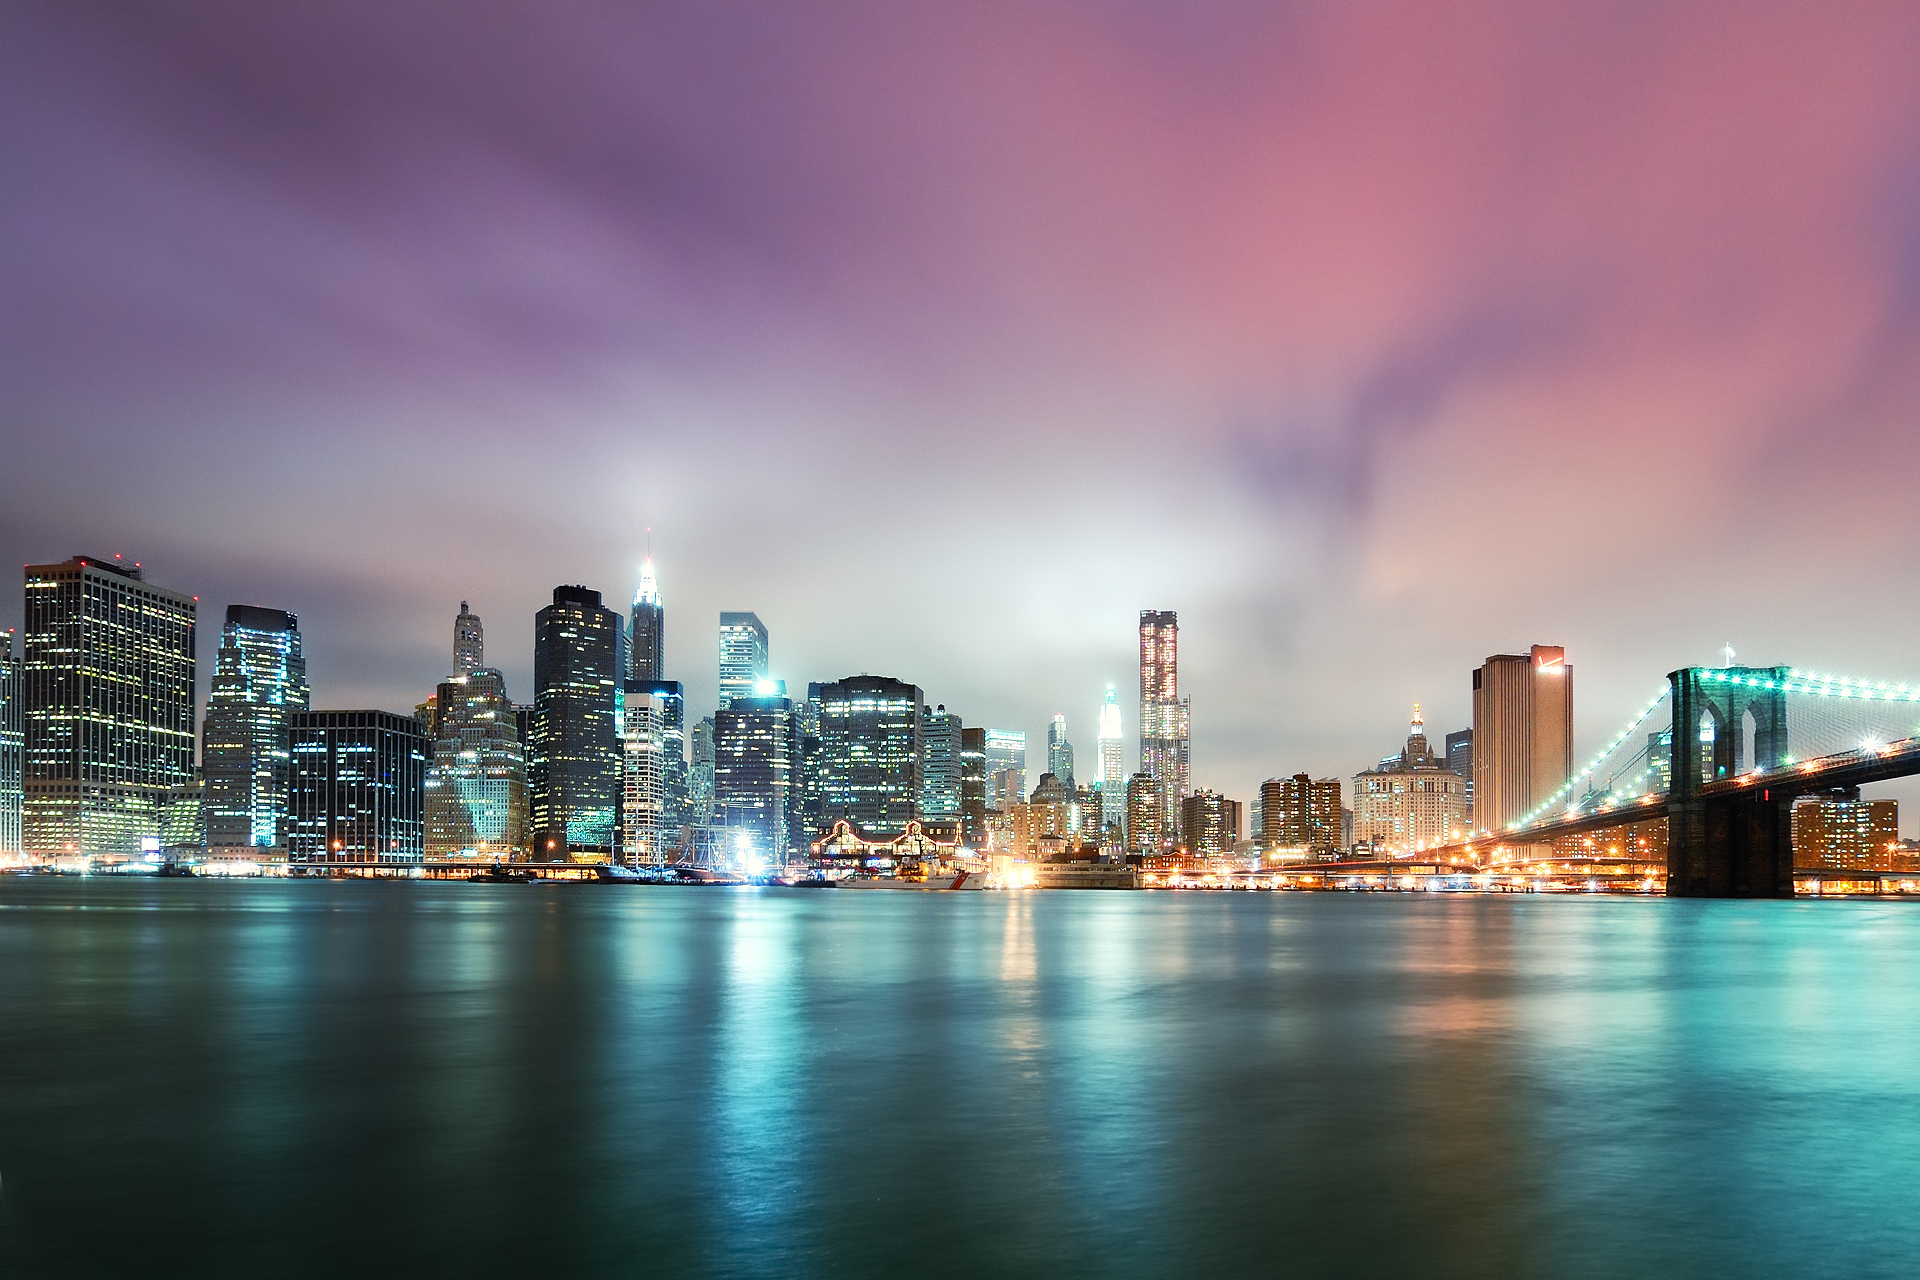 nyc, Brooklyn, Bridge, New, York, World, Architecture, Cities, Skyline, Cityscape, Rivers, Water, Reflection, Night, Buildings, Skyscraper, Lights, Window, Sky, Clouds, Hdr Wallpaper